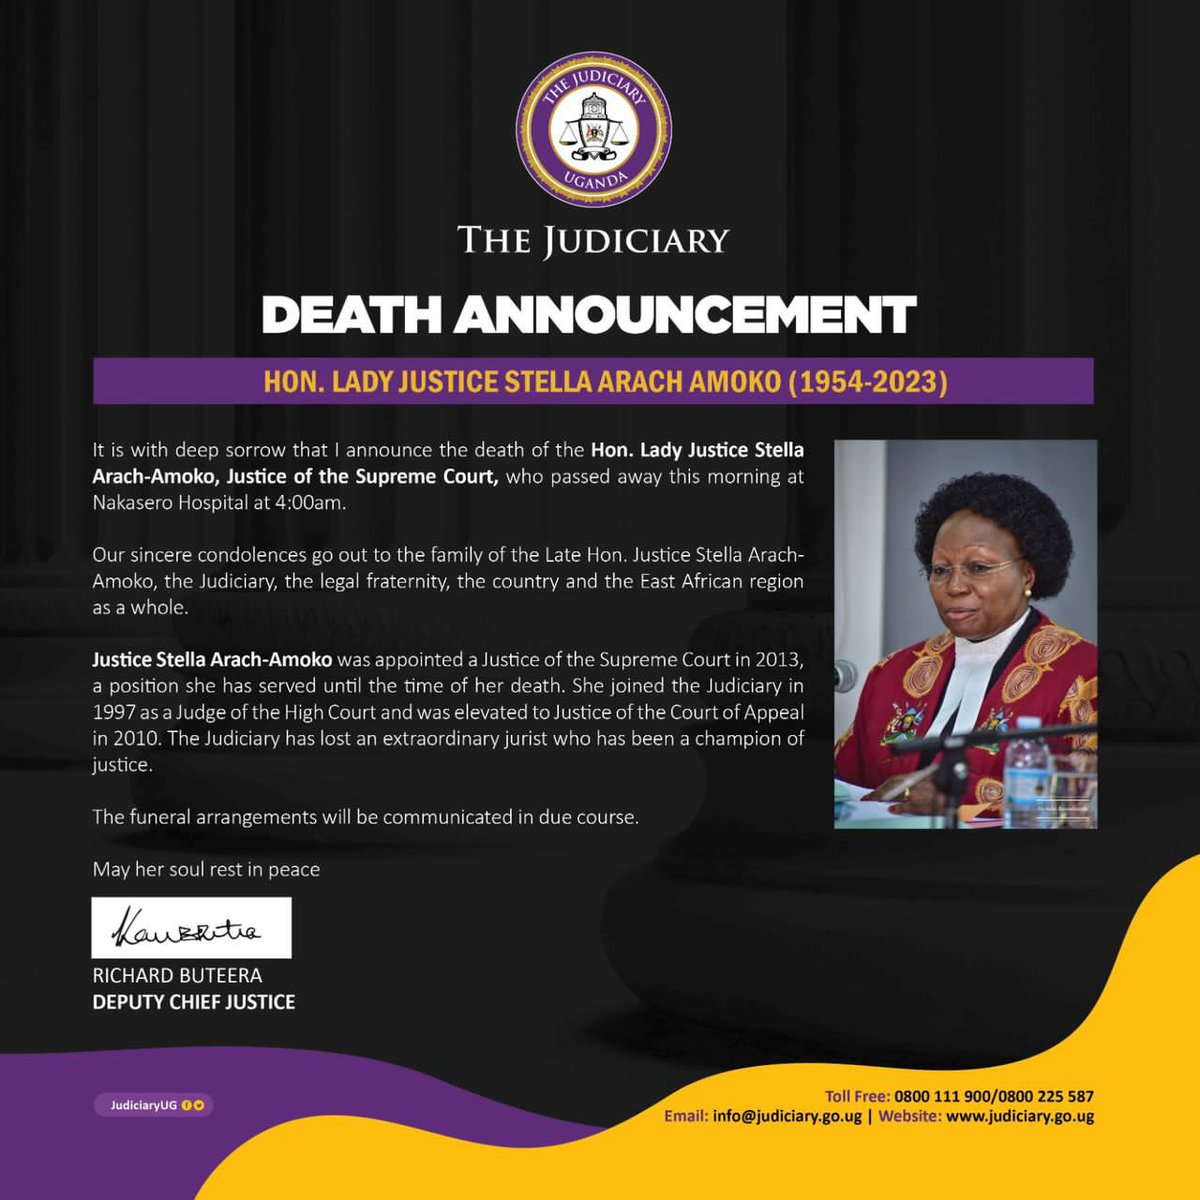 Coming soon after we lost Justices Kenneth Kakuru and Opio Aweri, this is such a heartbreaking blow to the Judiciary. I convey heartfelt condolences to the family of Lady Justice Stella Arach Amoko, the Chief Justice and the entire Judiciary. Uganda has lost a first rate Judge.